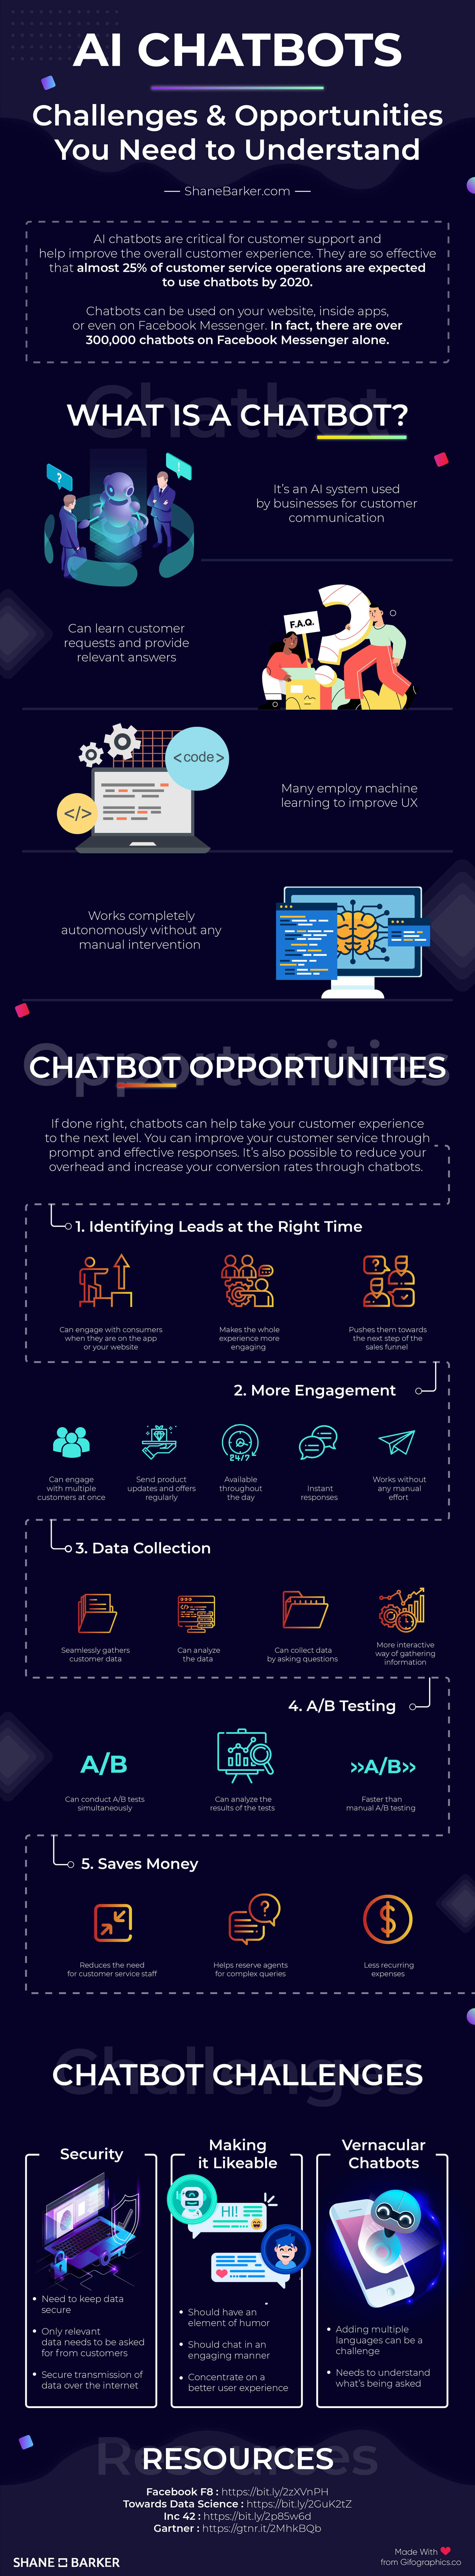 AI Chatbots: A Great Opportunity for Your Business [Infographic]

